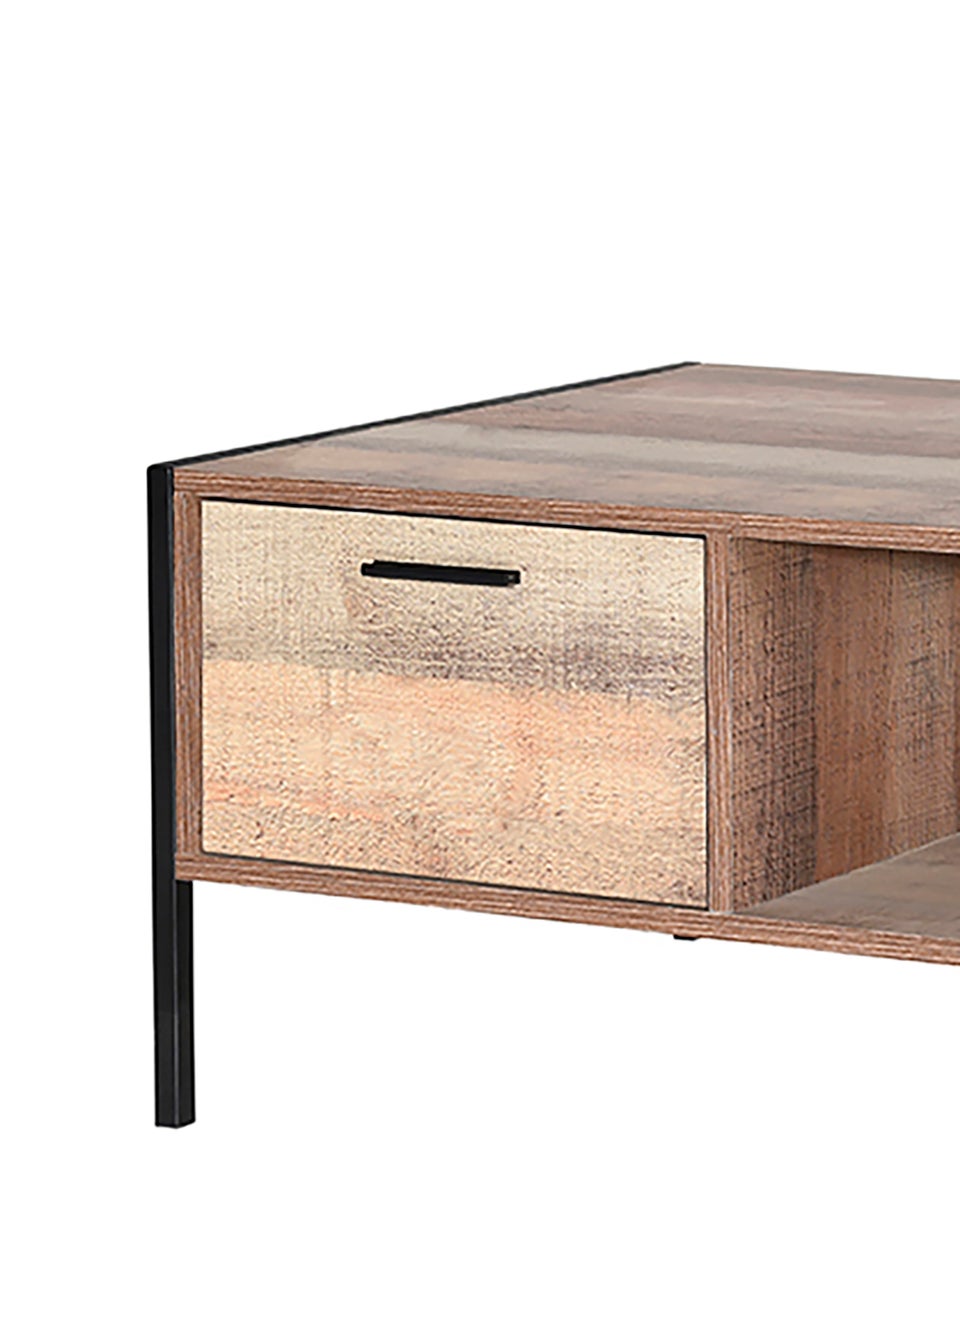 LPD Furniture Hoxton Coffee Table With Drawers (400x600x1238mm)